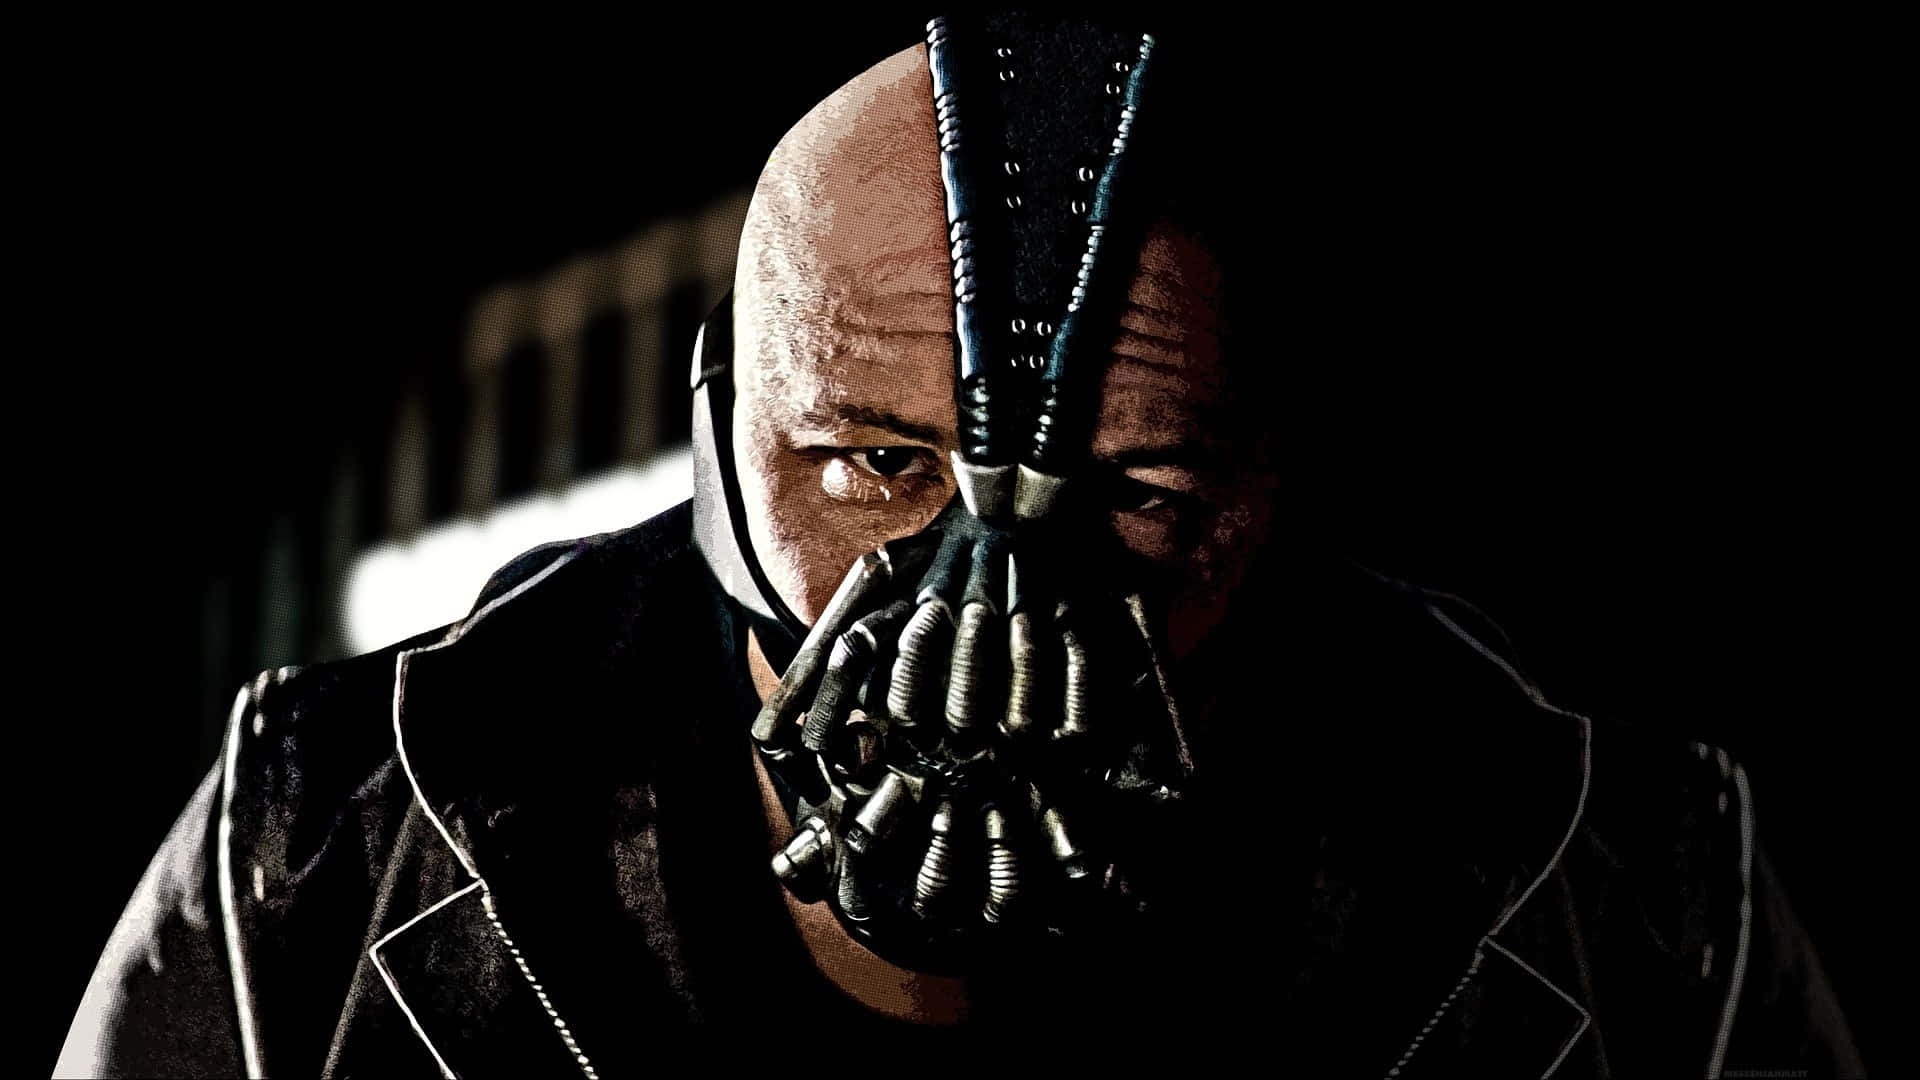 Bane Broods Into The Night As He Plans His Next Move Against Gotham. Background